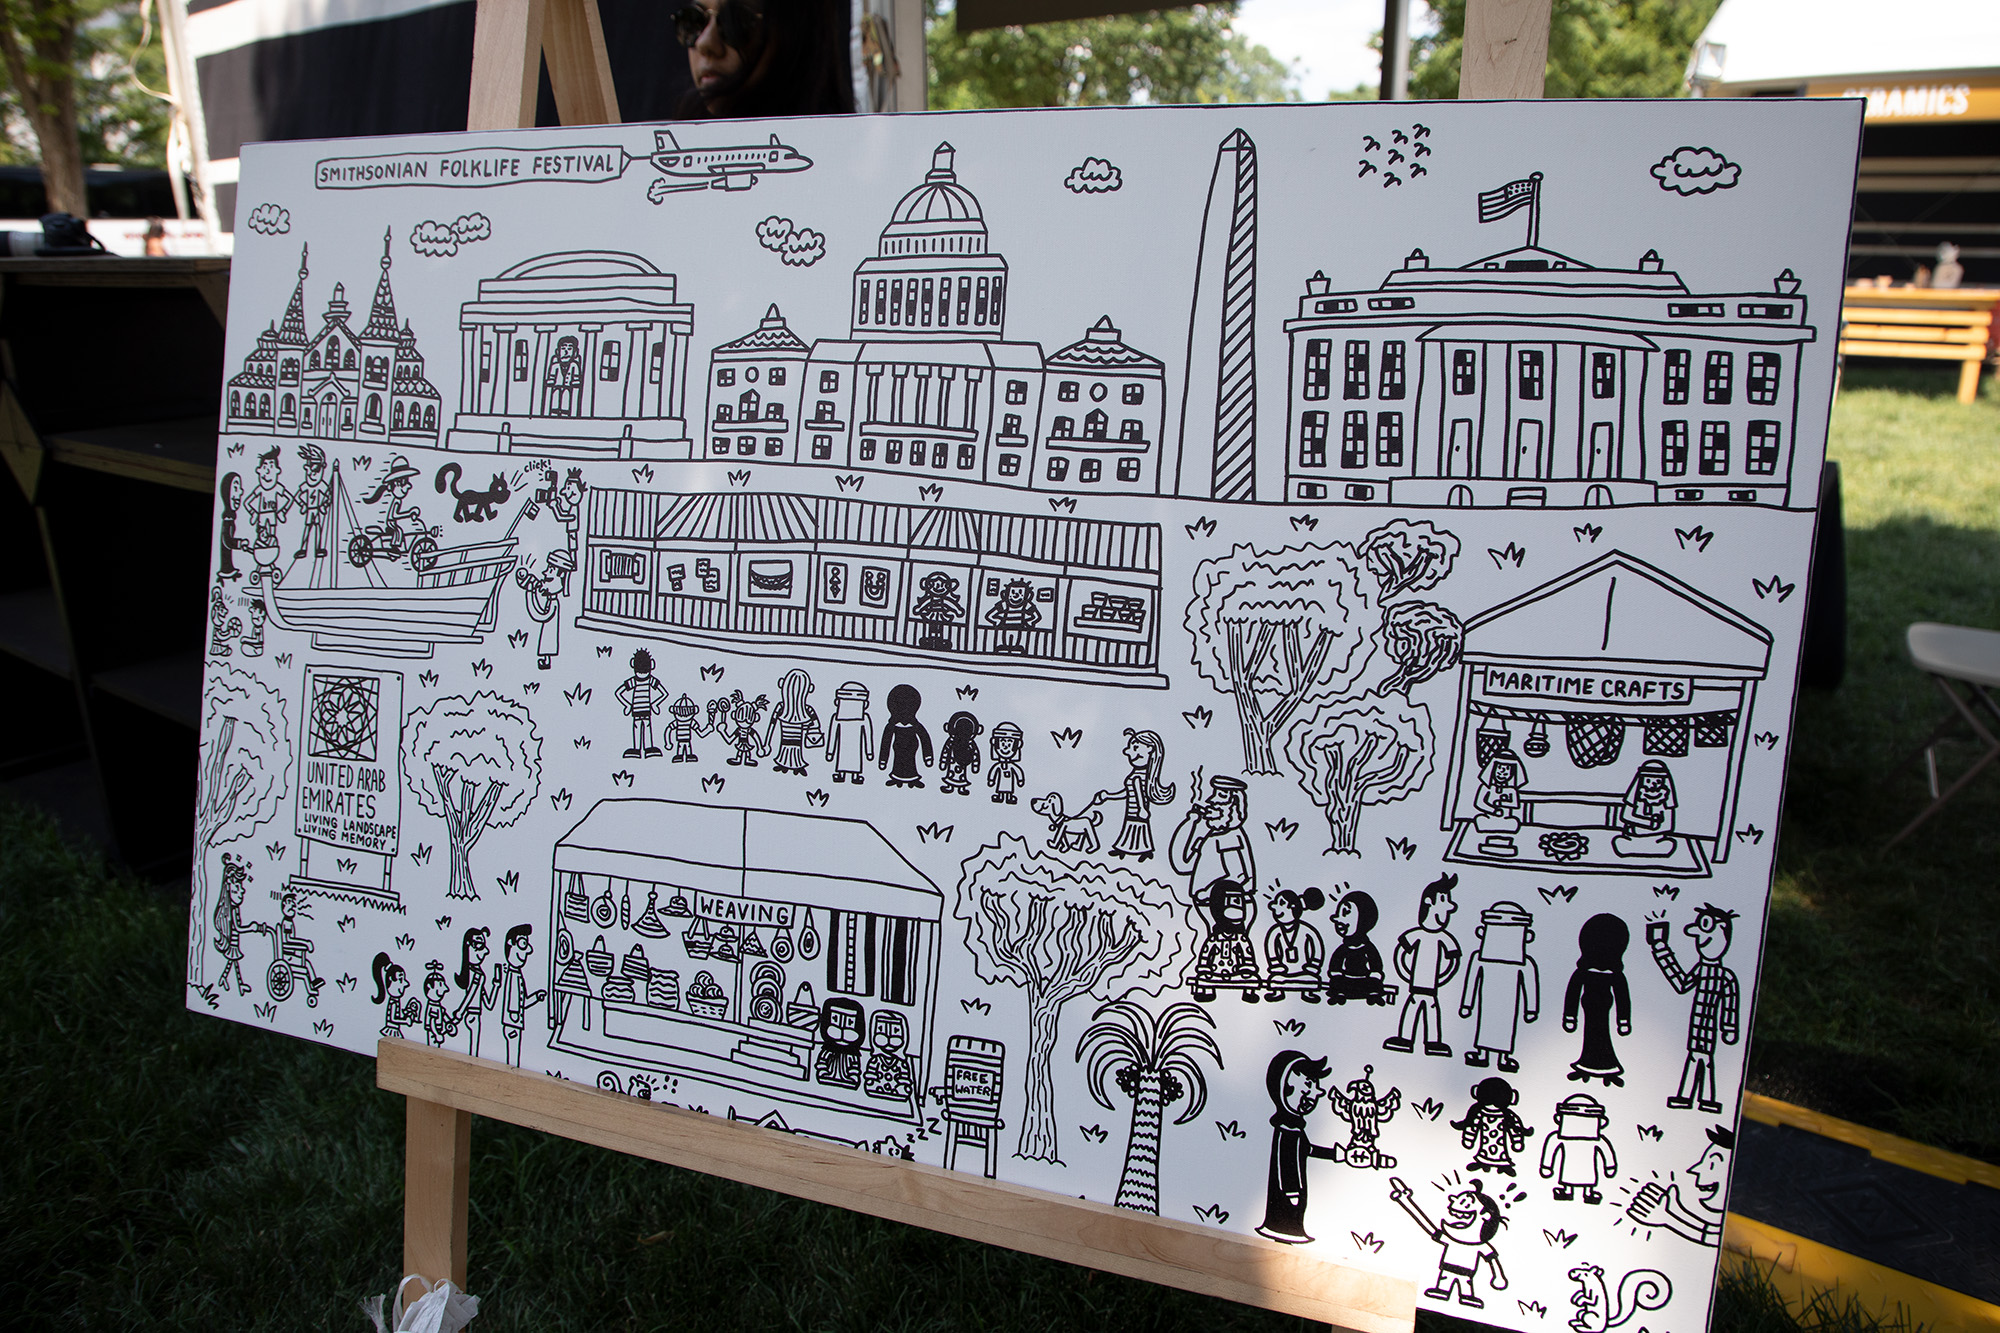 Black-and-white line drawing of the Smithsonian Folklife Festival